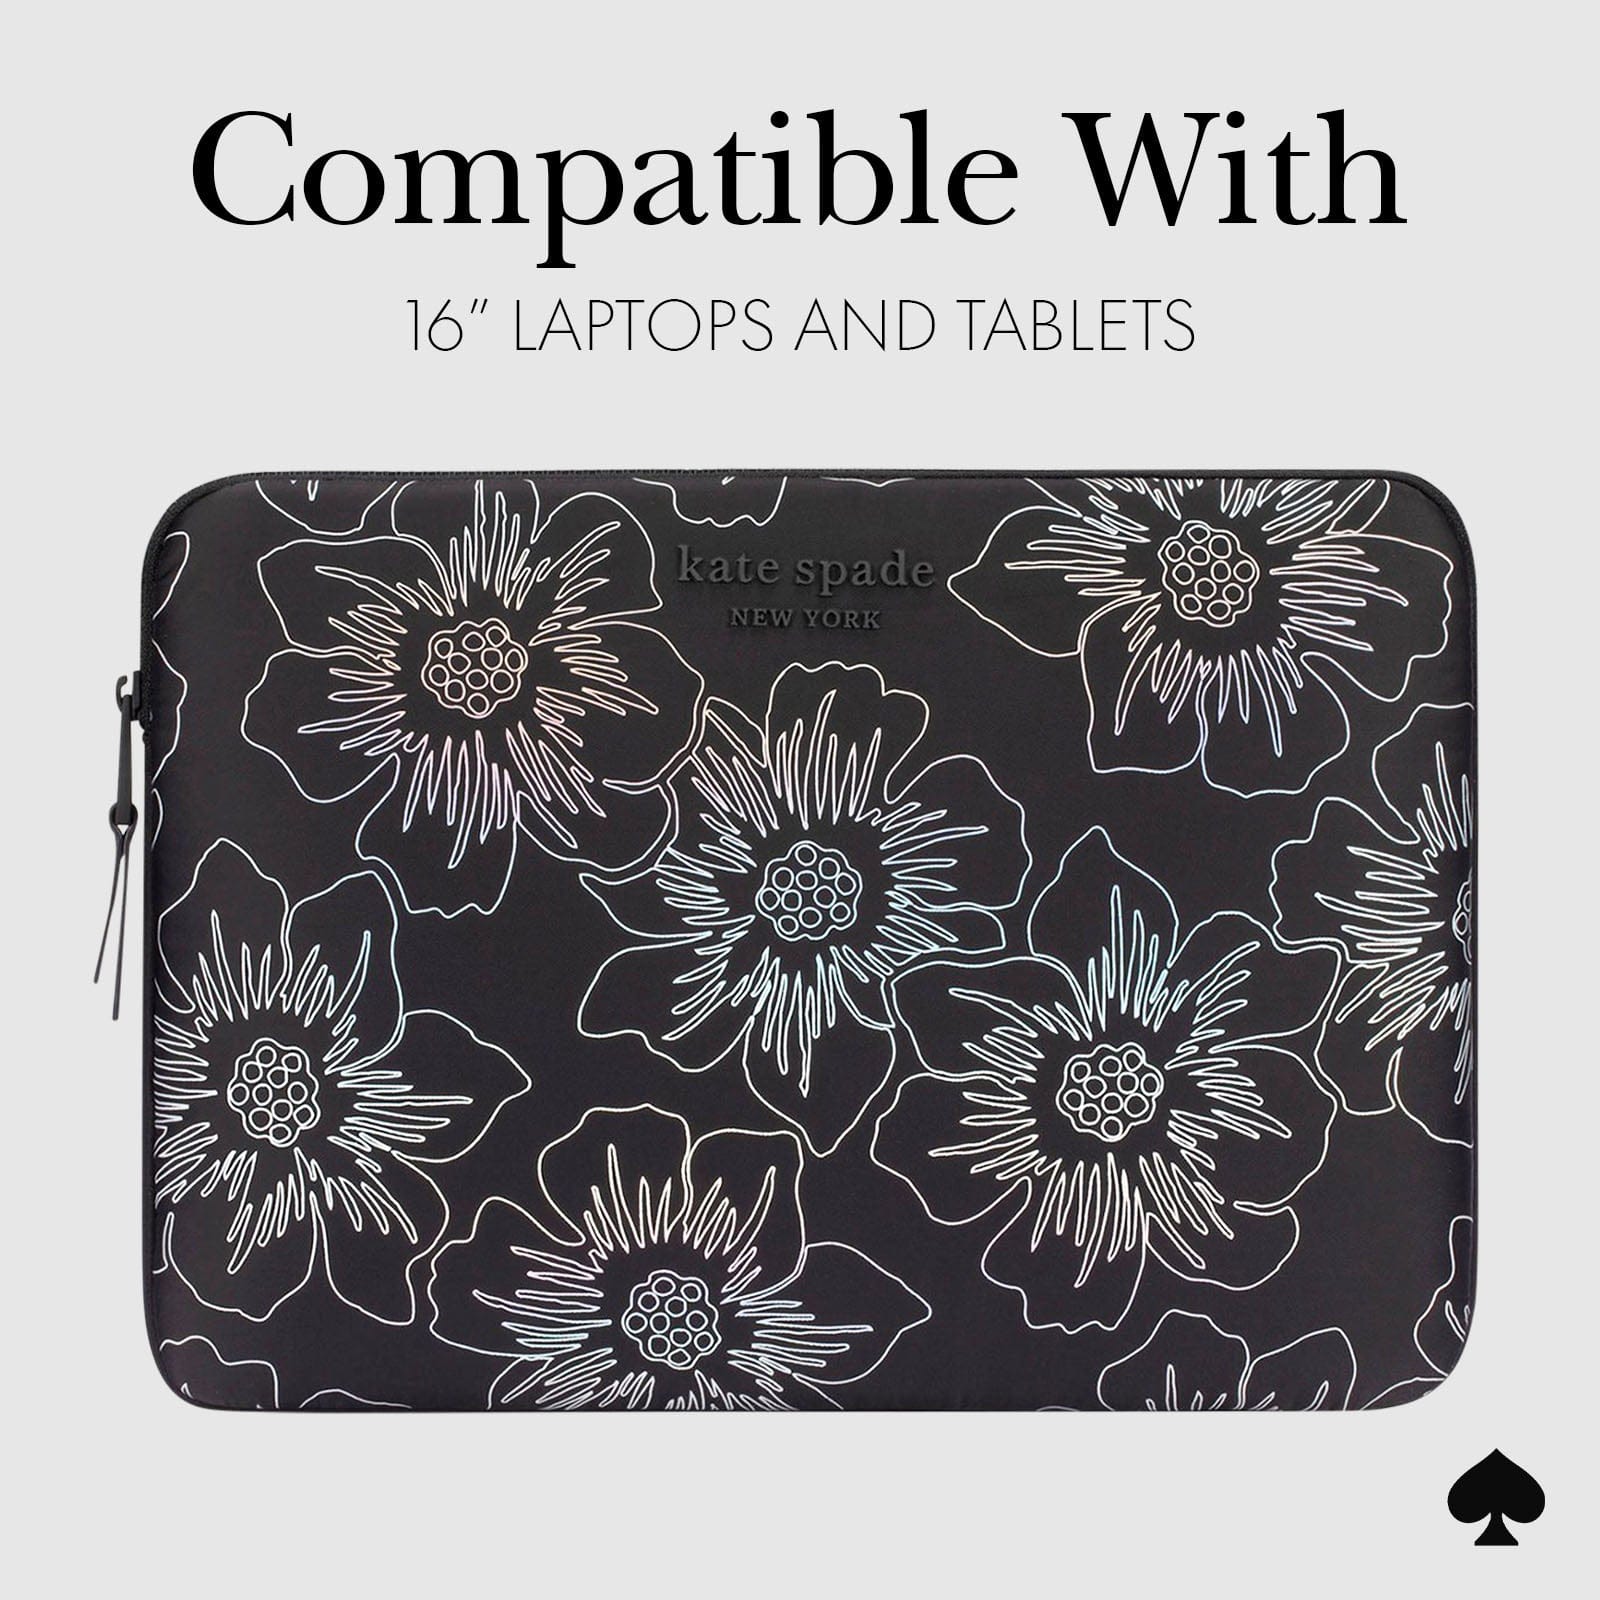 COMPATIBLE WITH 16" LAPTOPS AND TABLETS